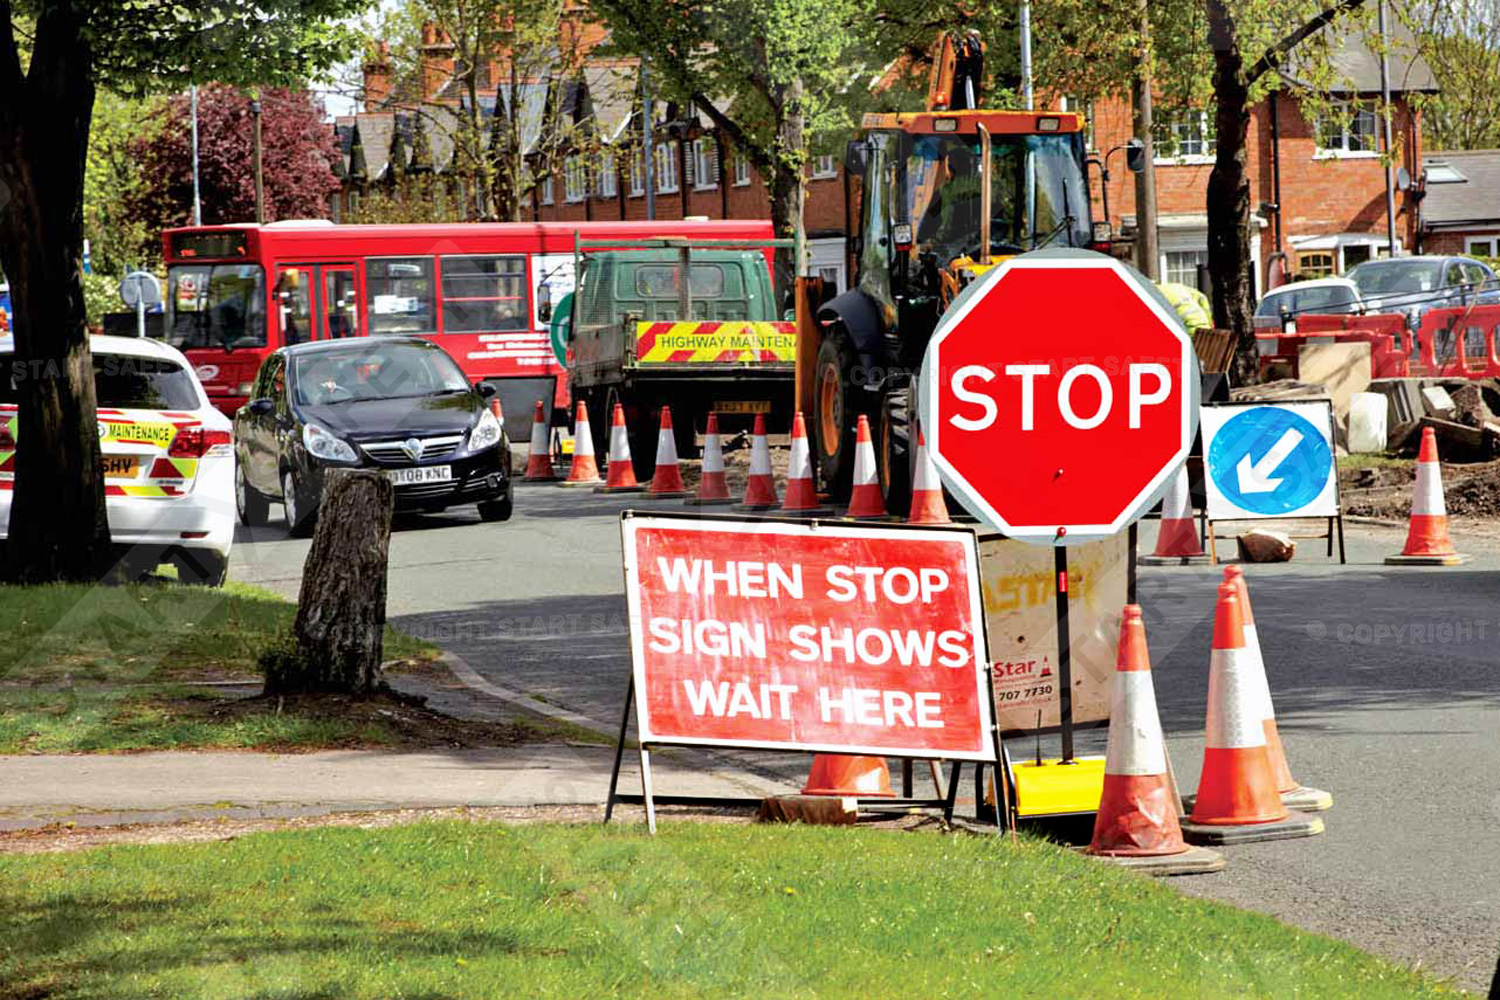 Robosign in use with traffic cones and stanchion signage